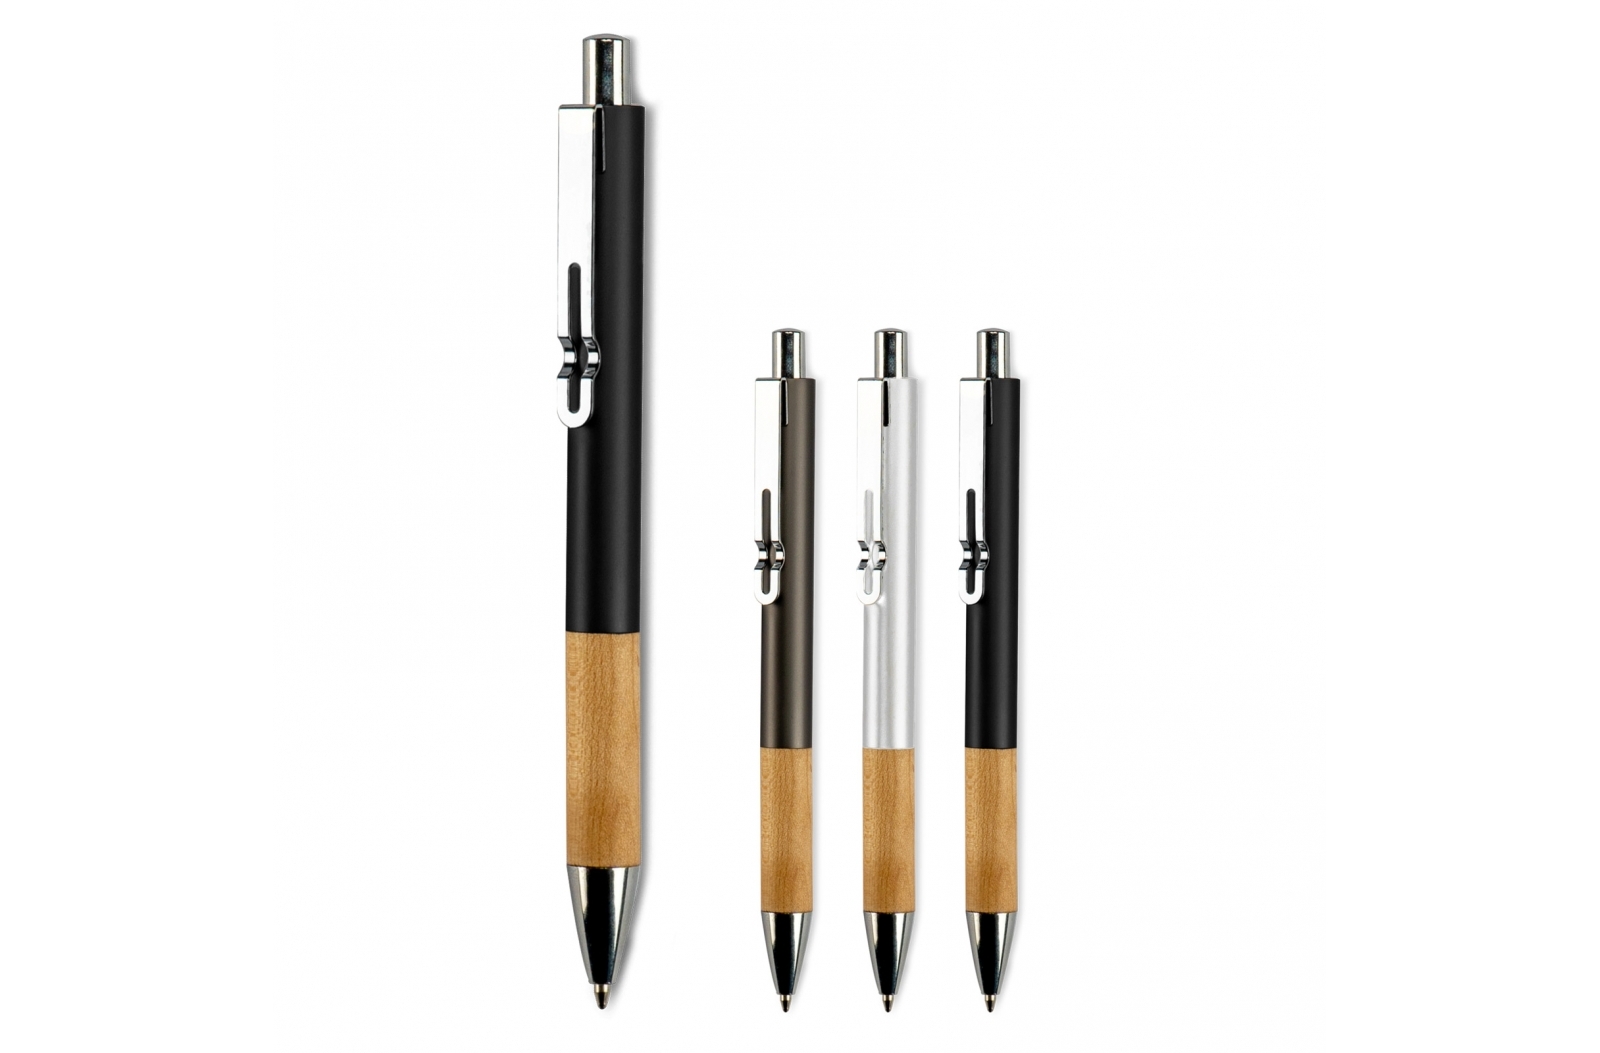 This is a unique design aluminium ball pen that features a wooden grip and a metal clip. This pen stands out for its innovative design and functionality, offering a comfortable grip and durability, making it a truly premium writing instrument. - Barnham